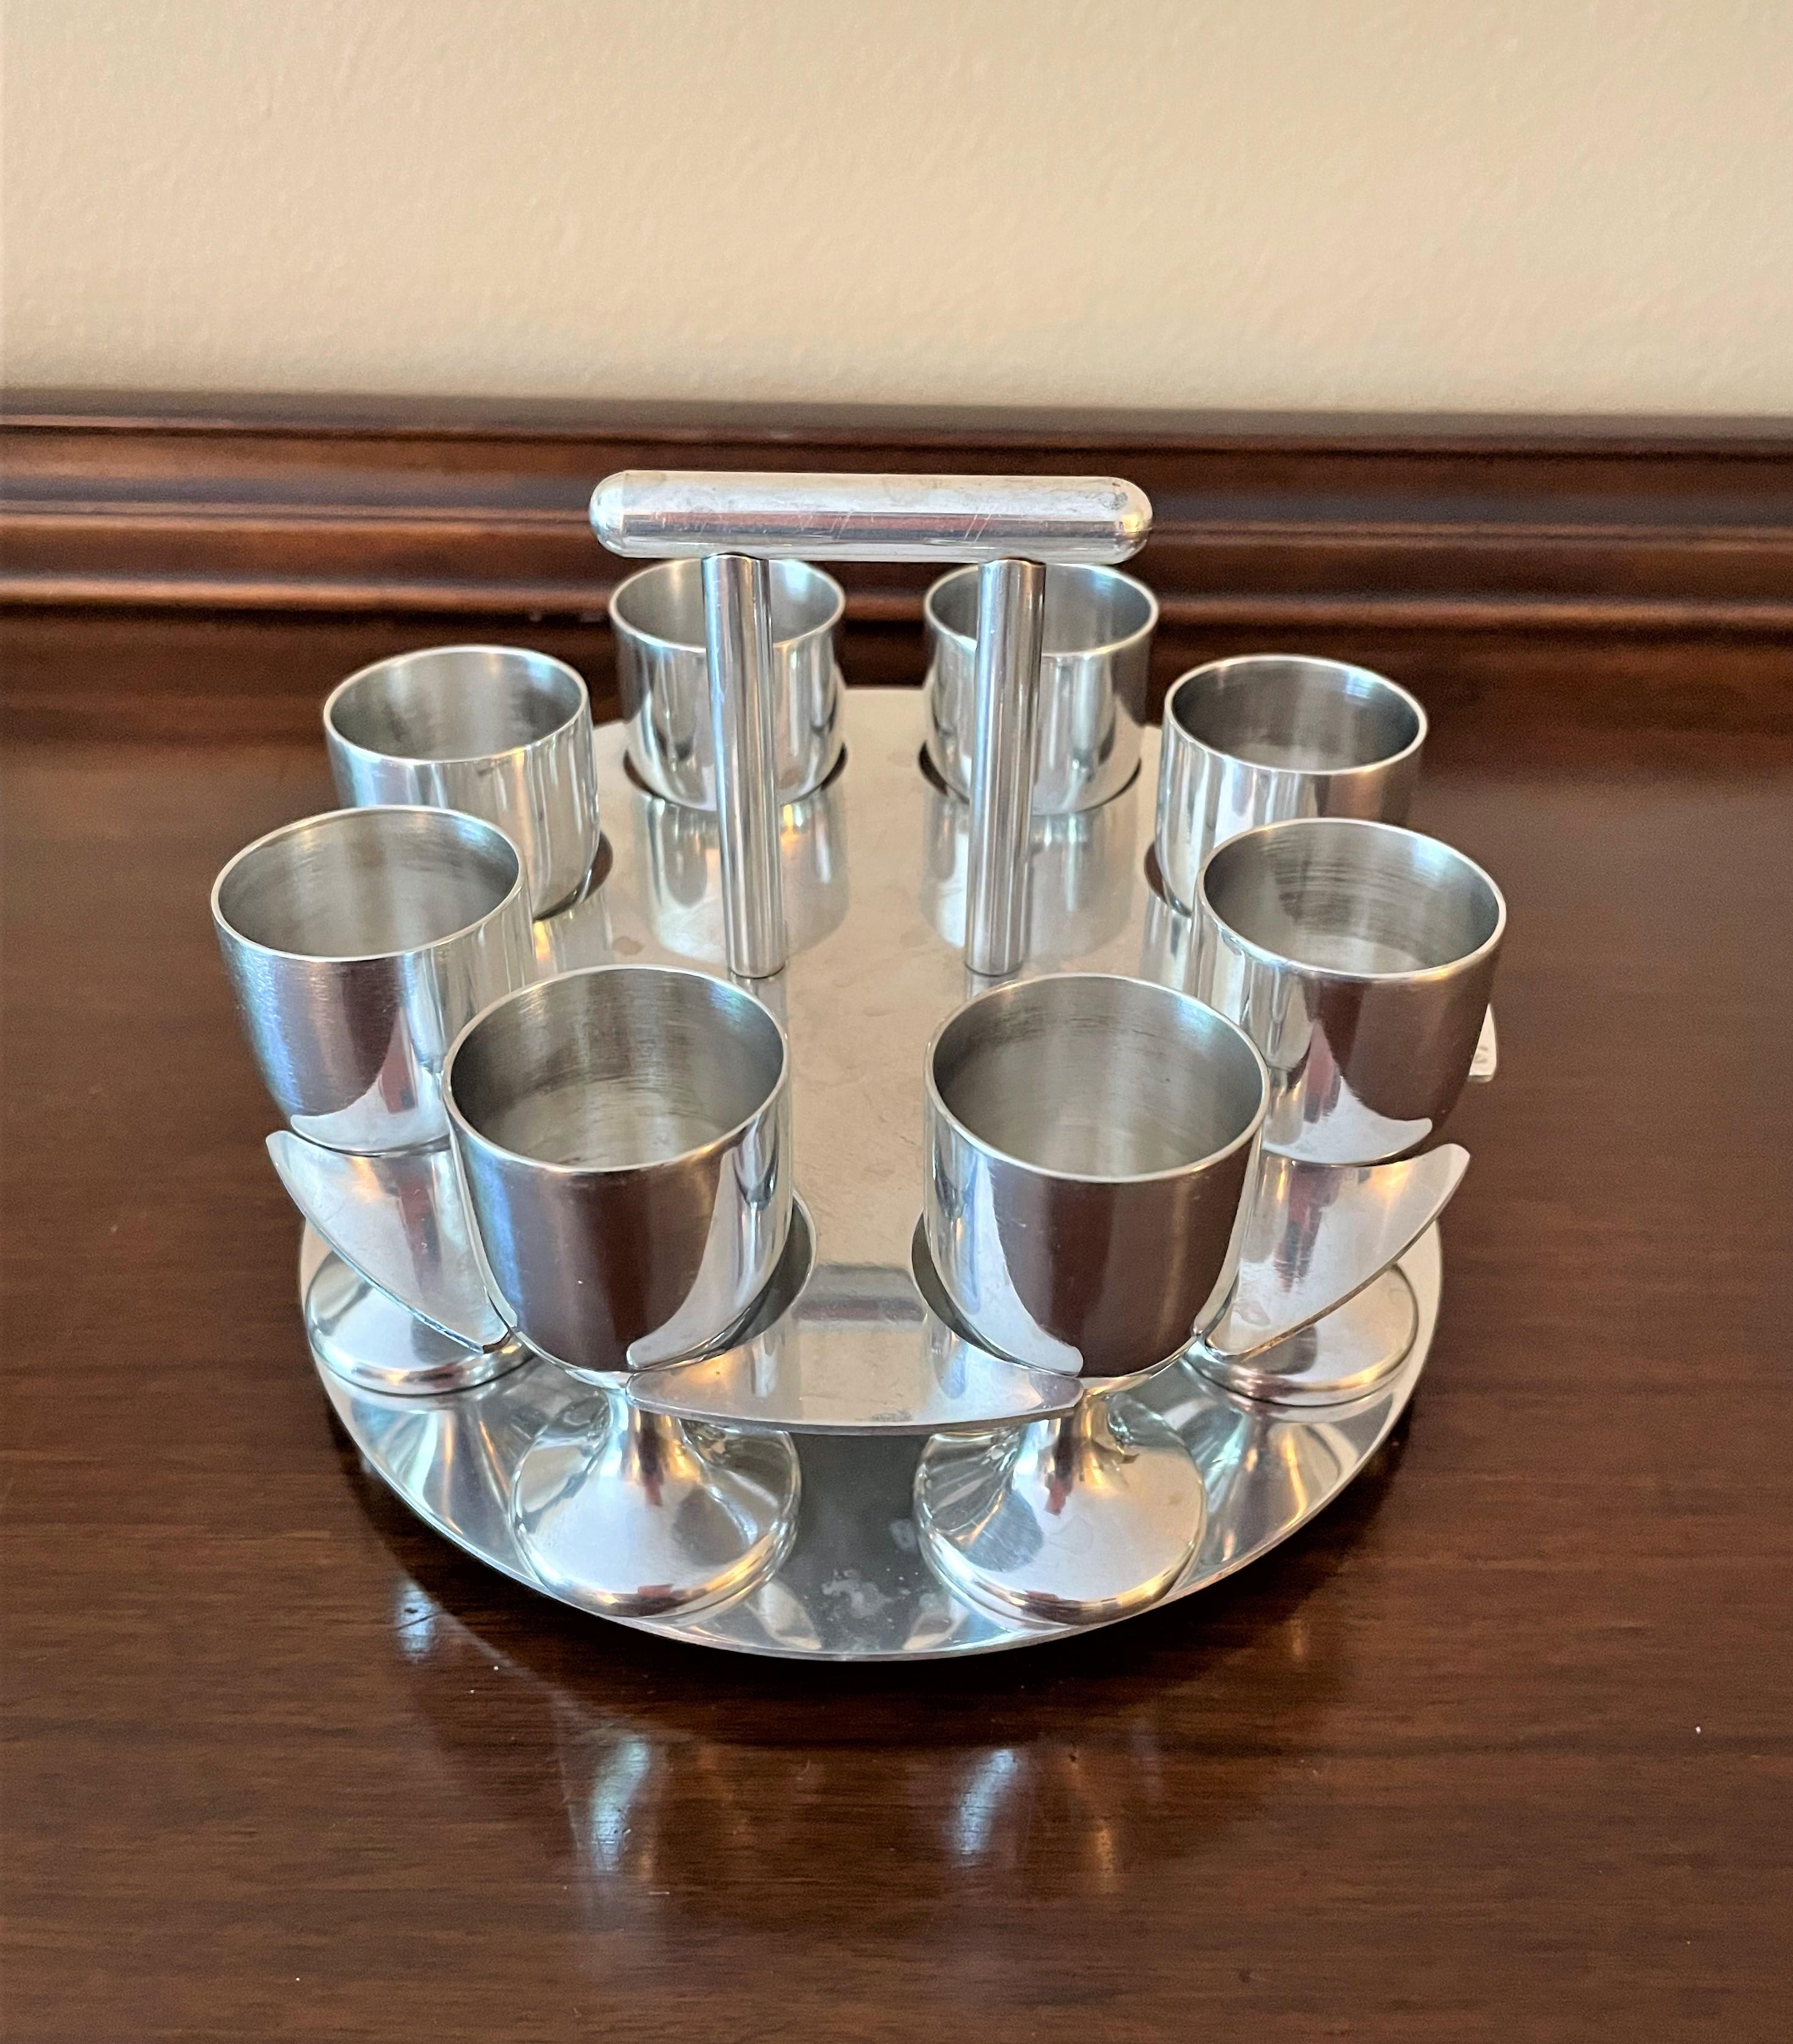 Danish Mid-20th Century Stainless Steel Aperitifs / Cordials or Shot Glasses, Set of 8 For Sale